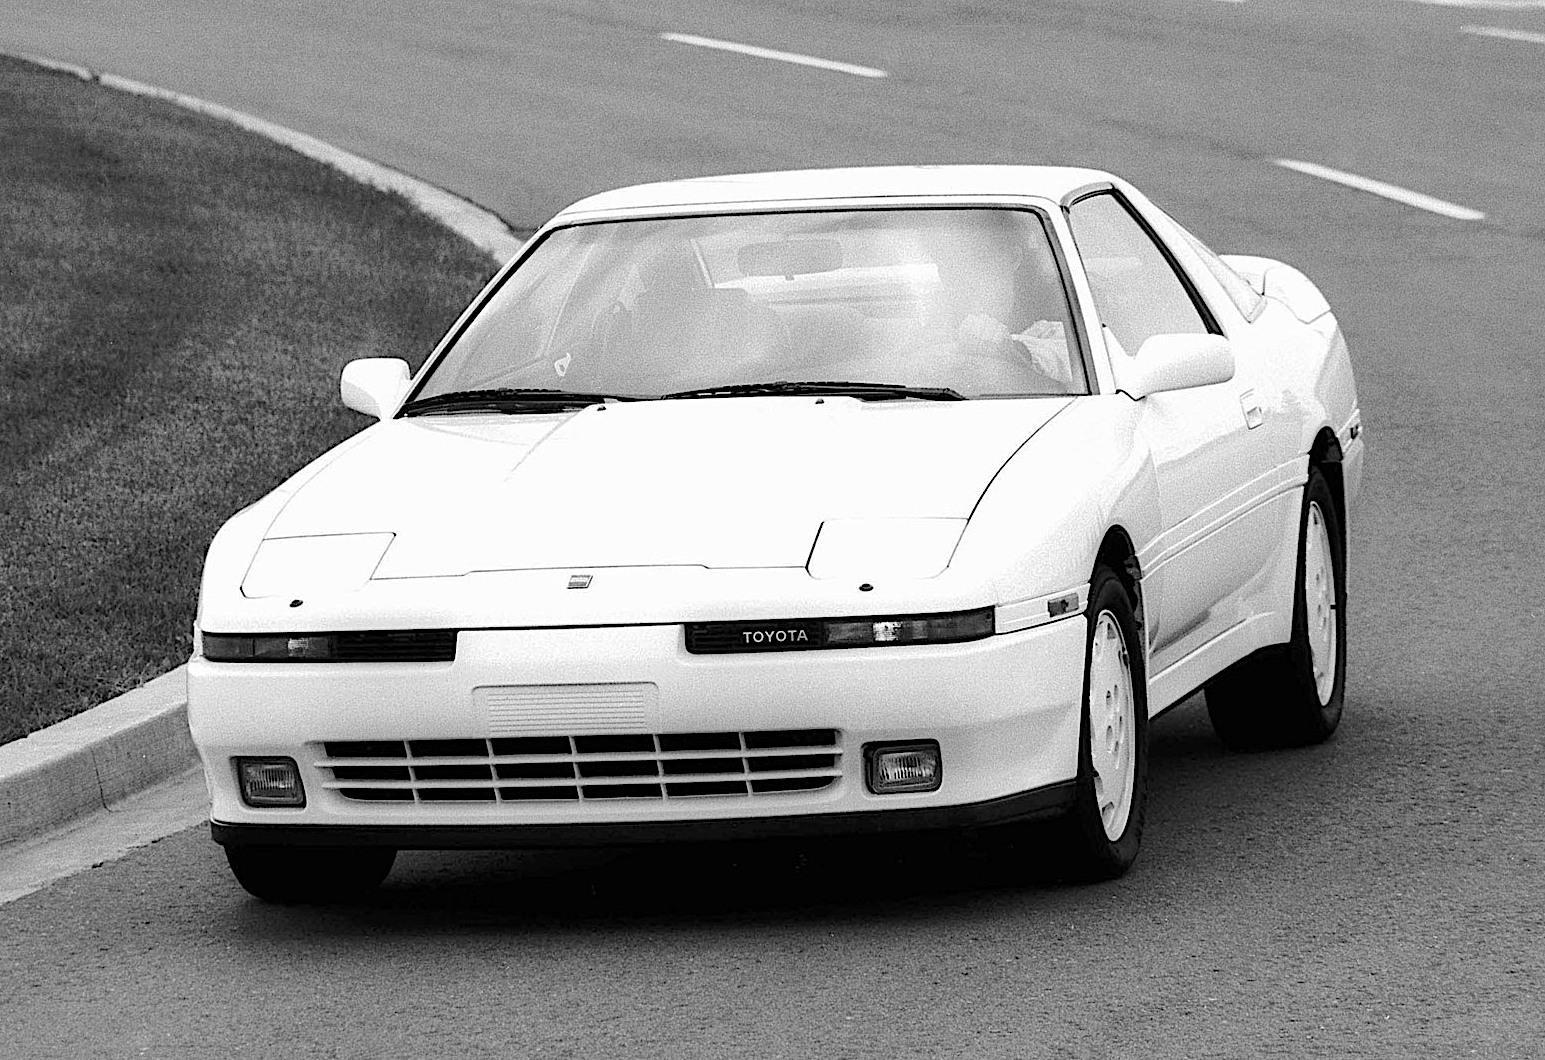 The Sports Car We Should Have Bought Twenty Years Ago